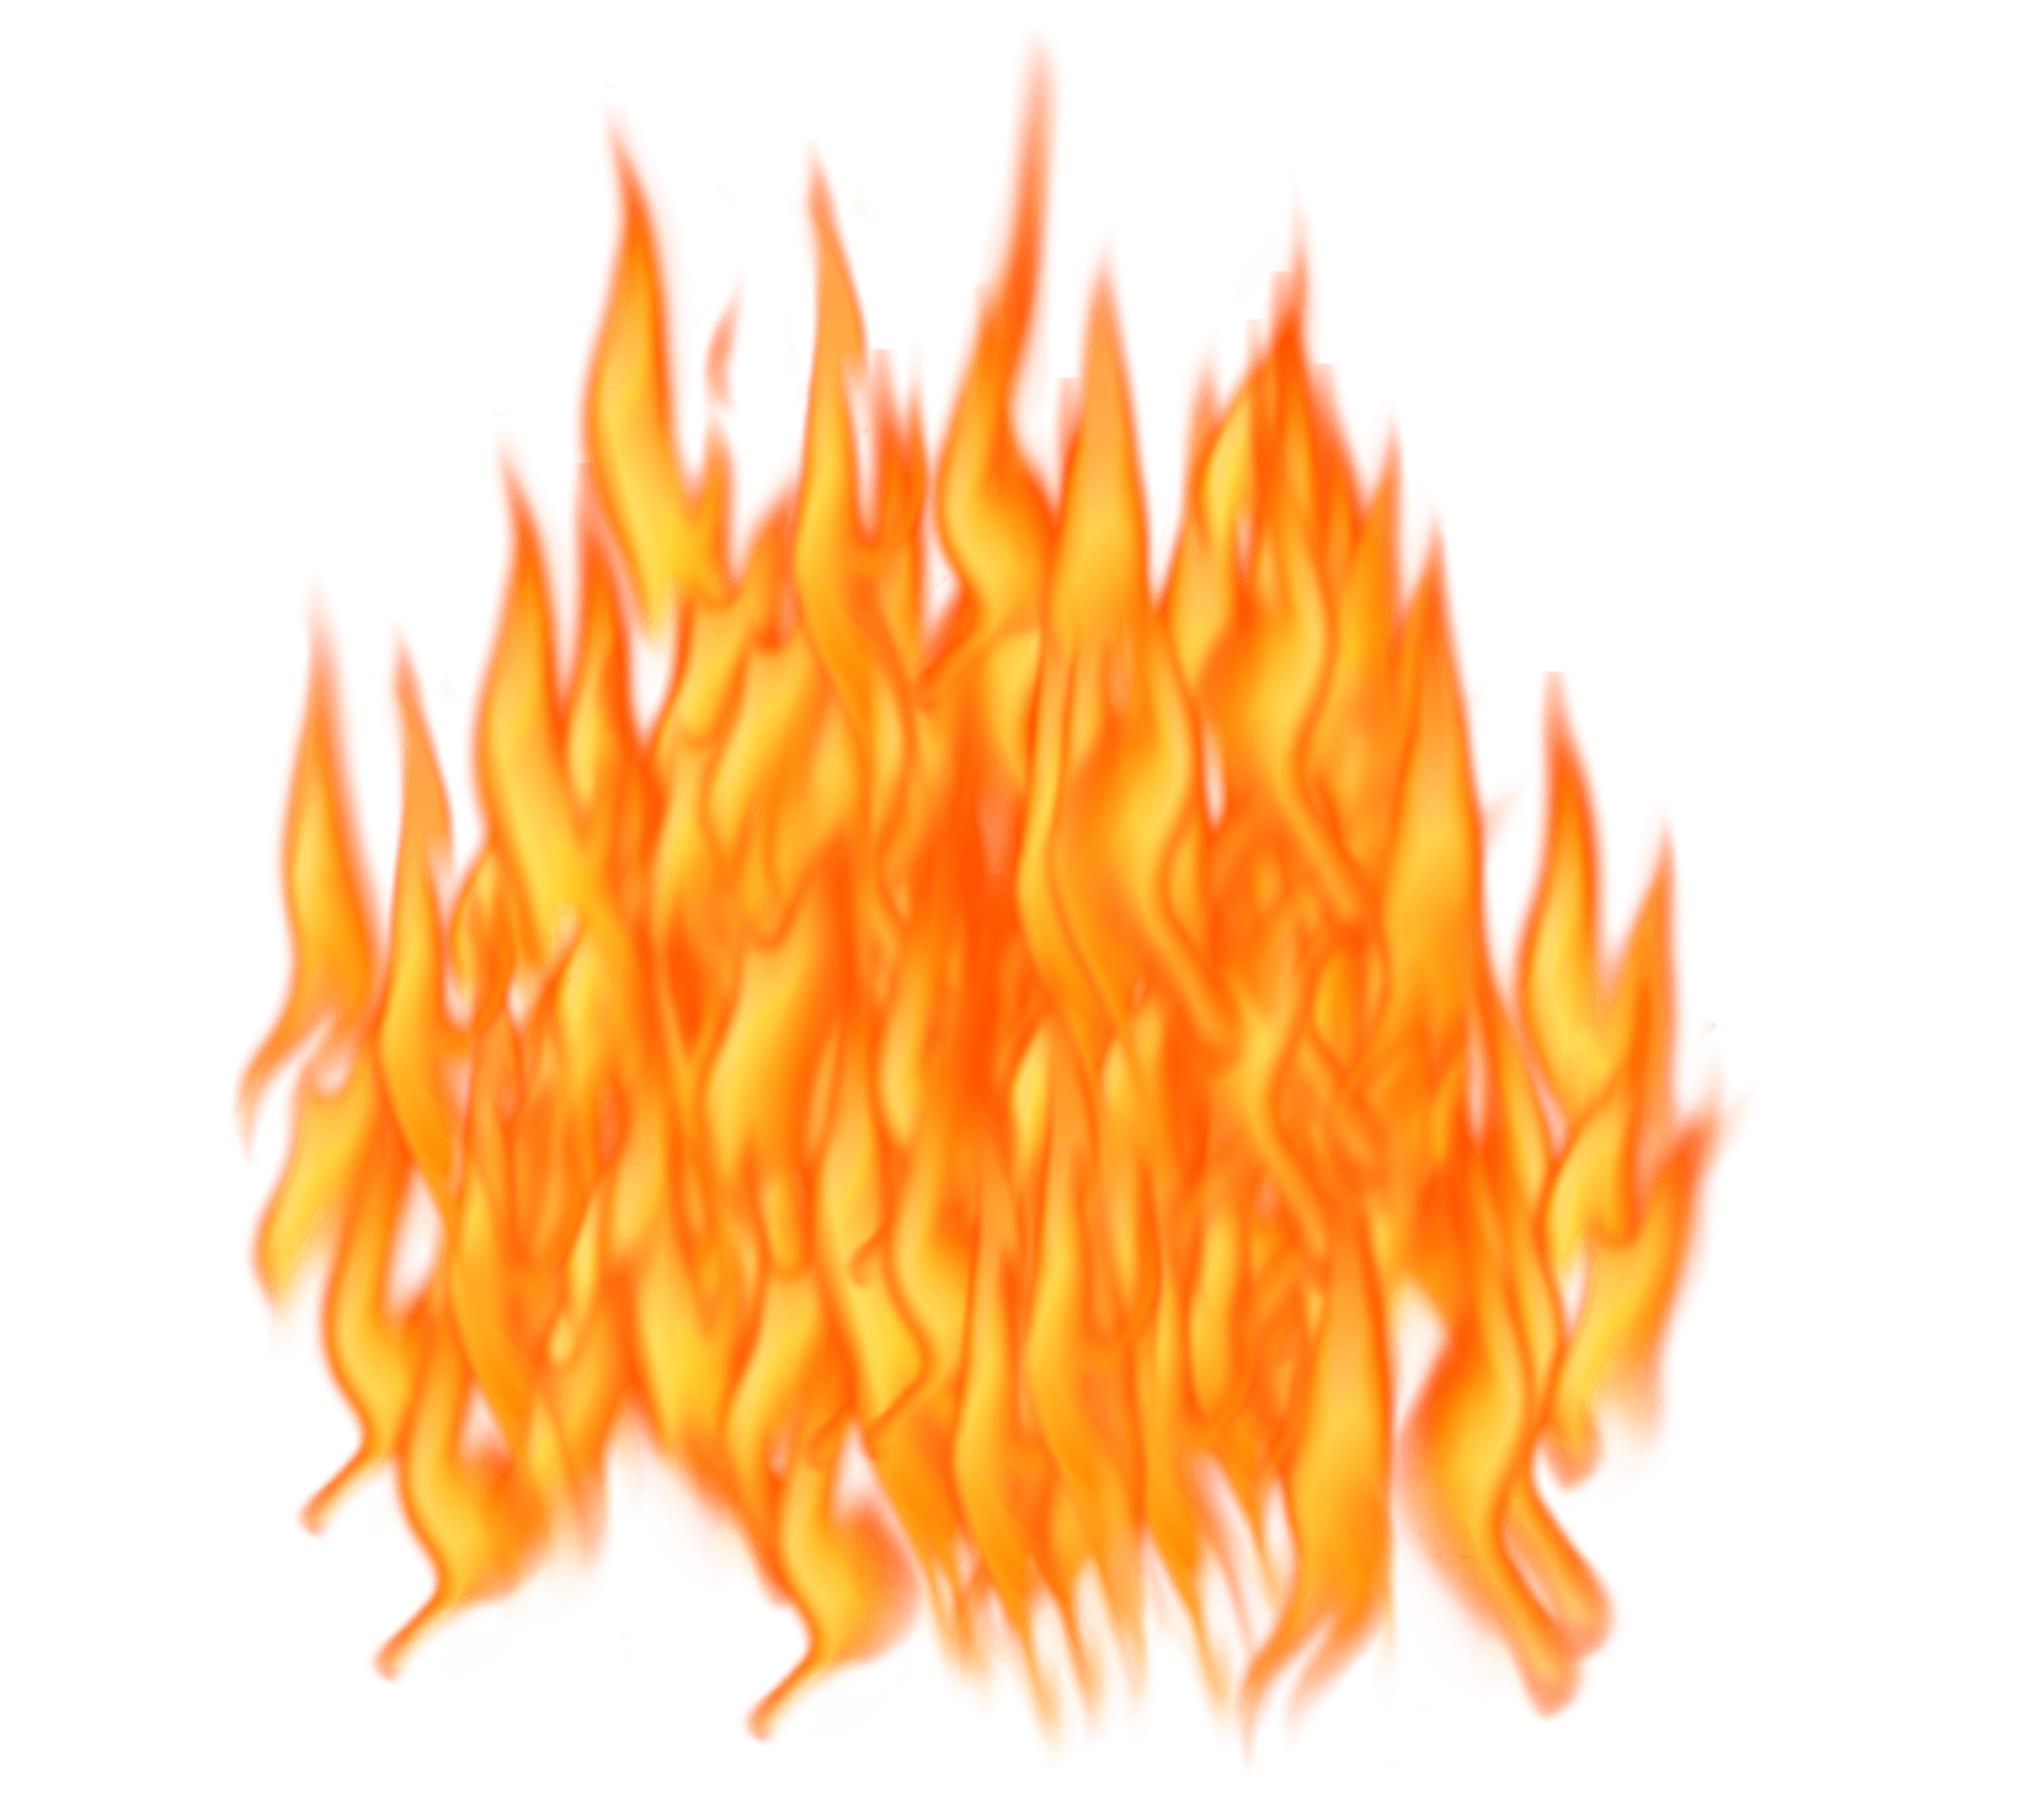 Flame clipart spaceship. Fire png images free